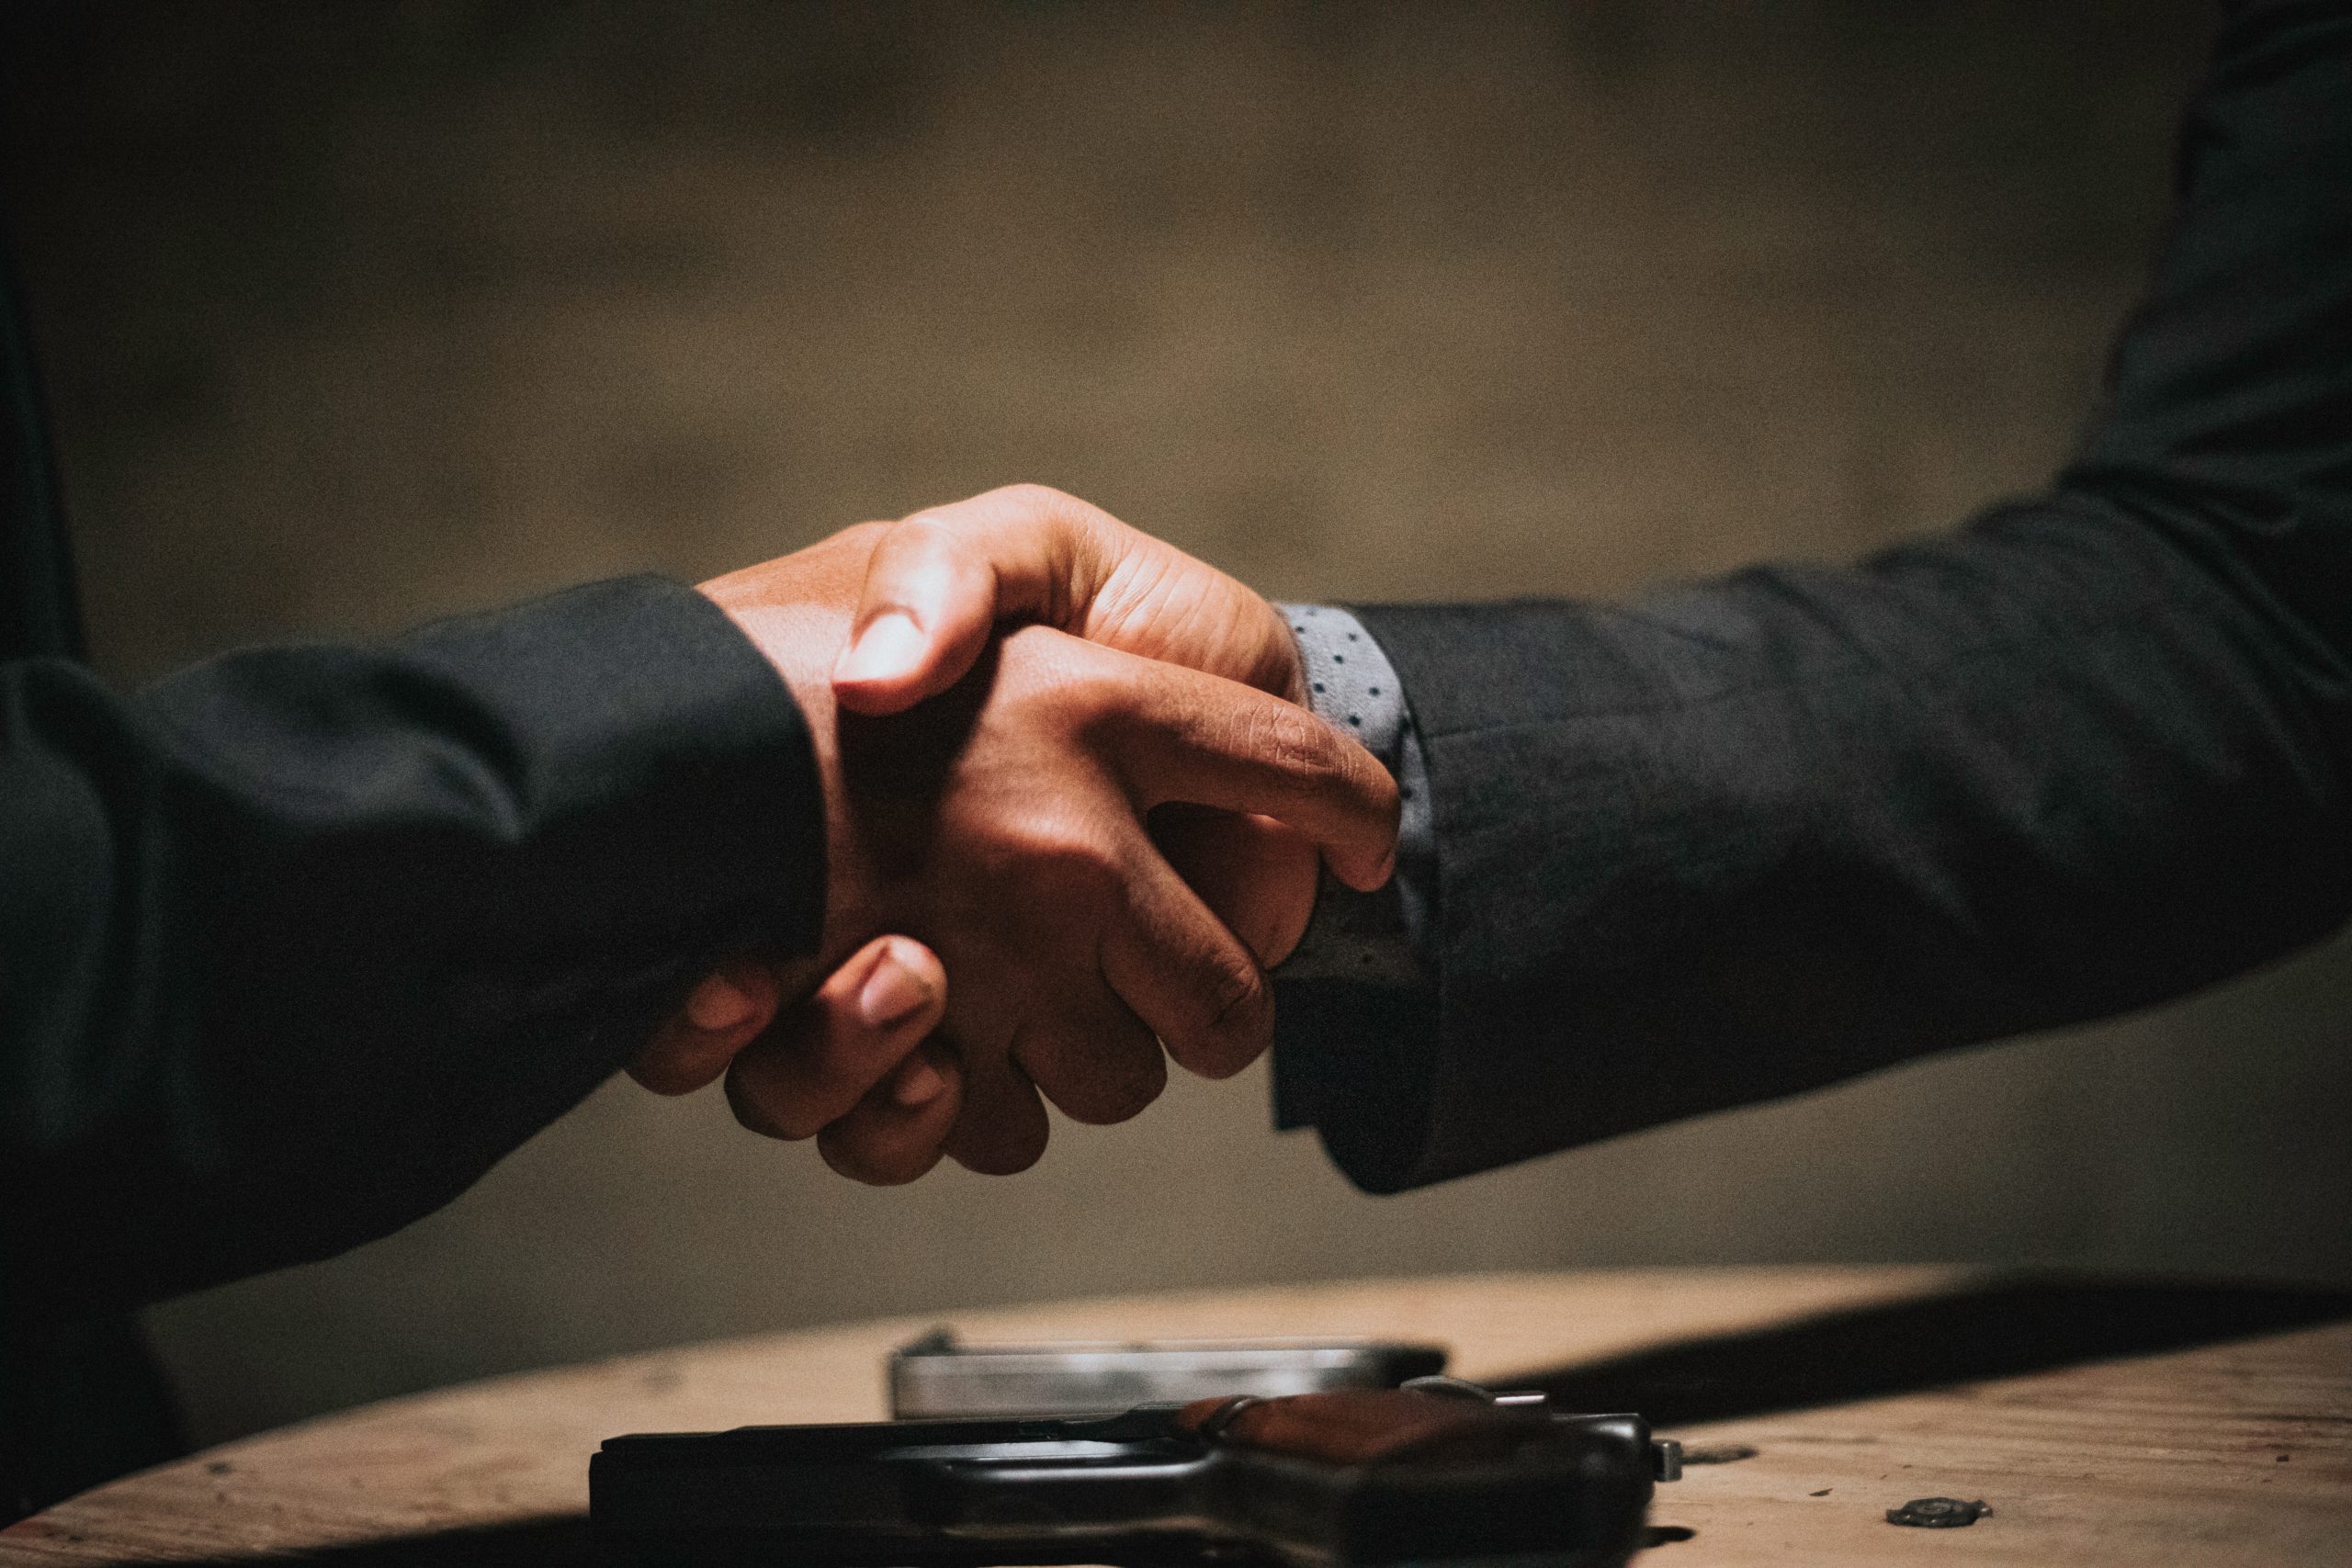 Mergers & Acquisitions? Want to buy a company or business?